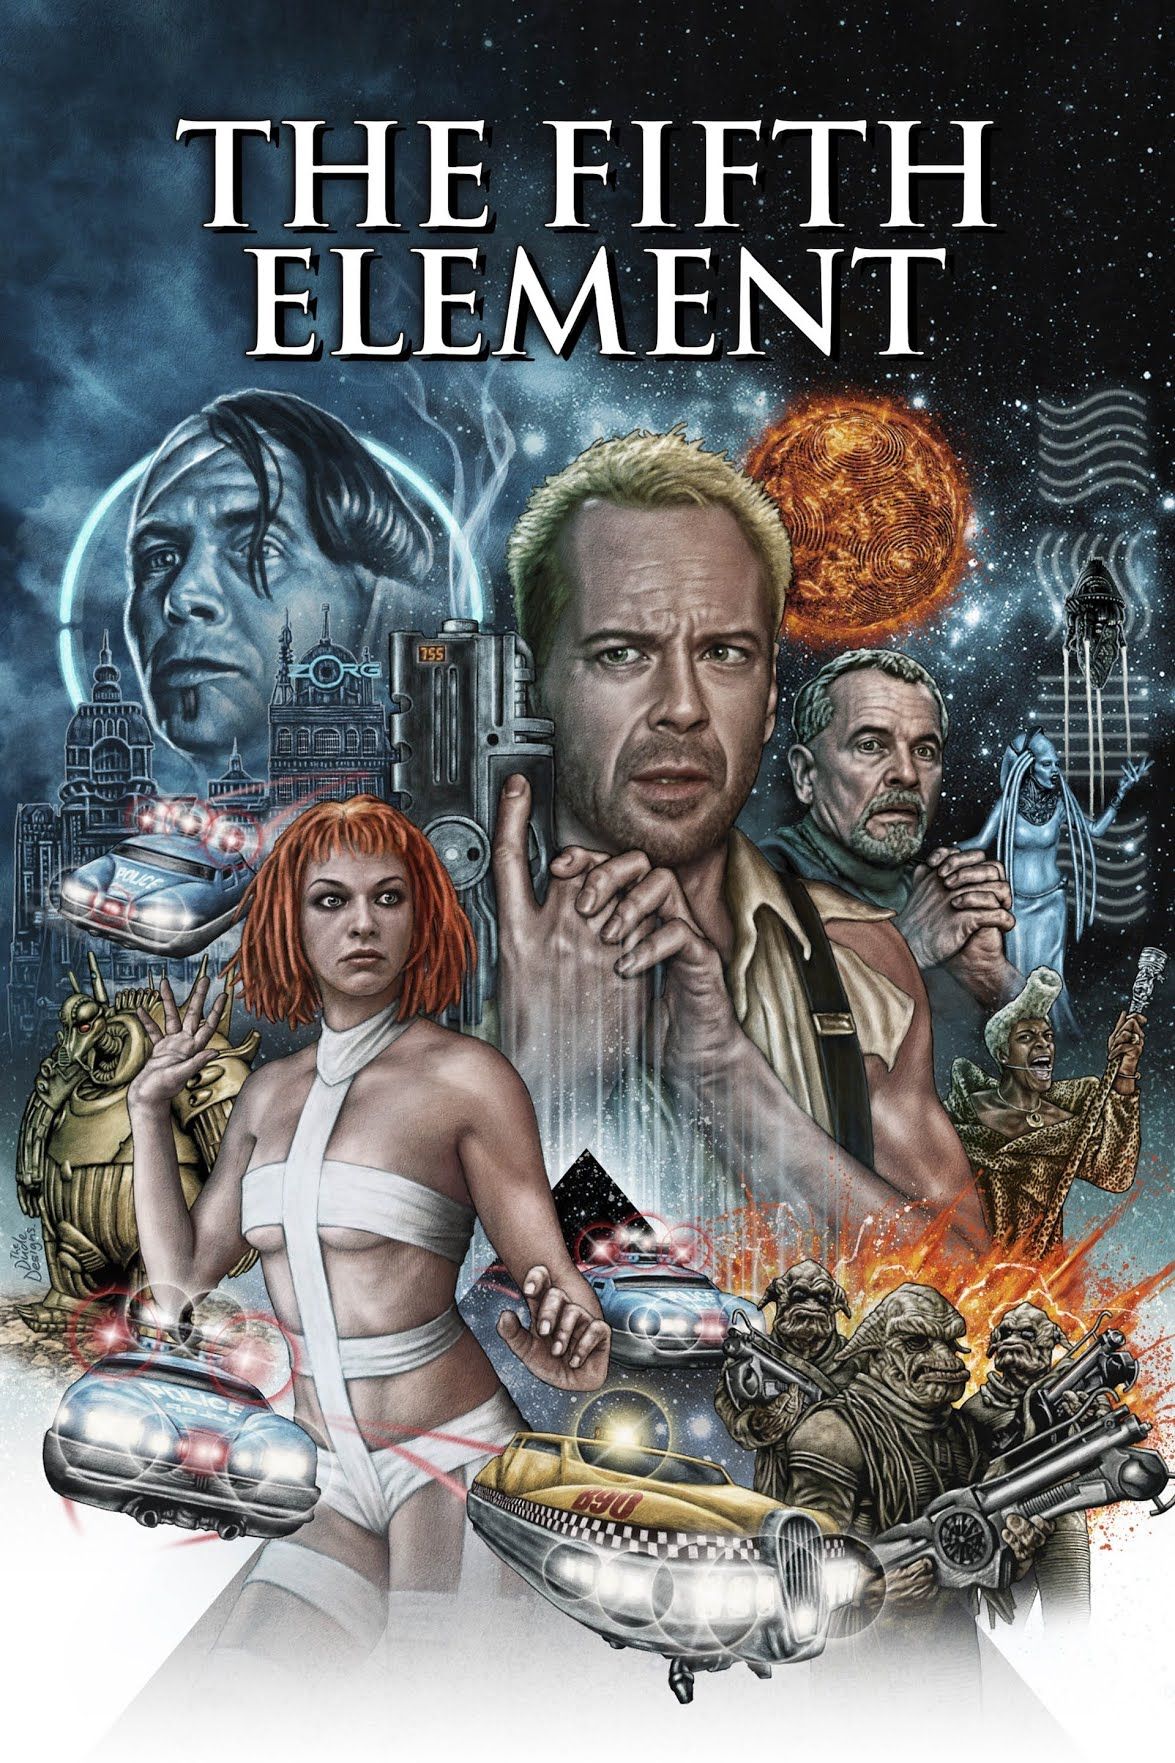 The Fifth Element (1997) Hindi Dubbed ORG BDRip Full Movie 720p 480p